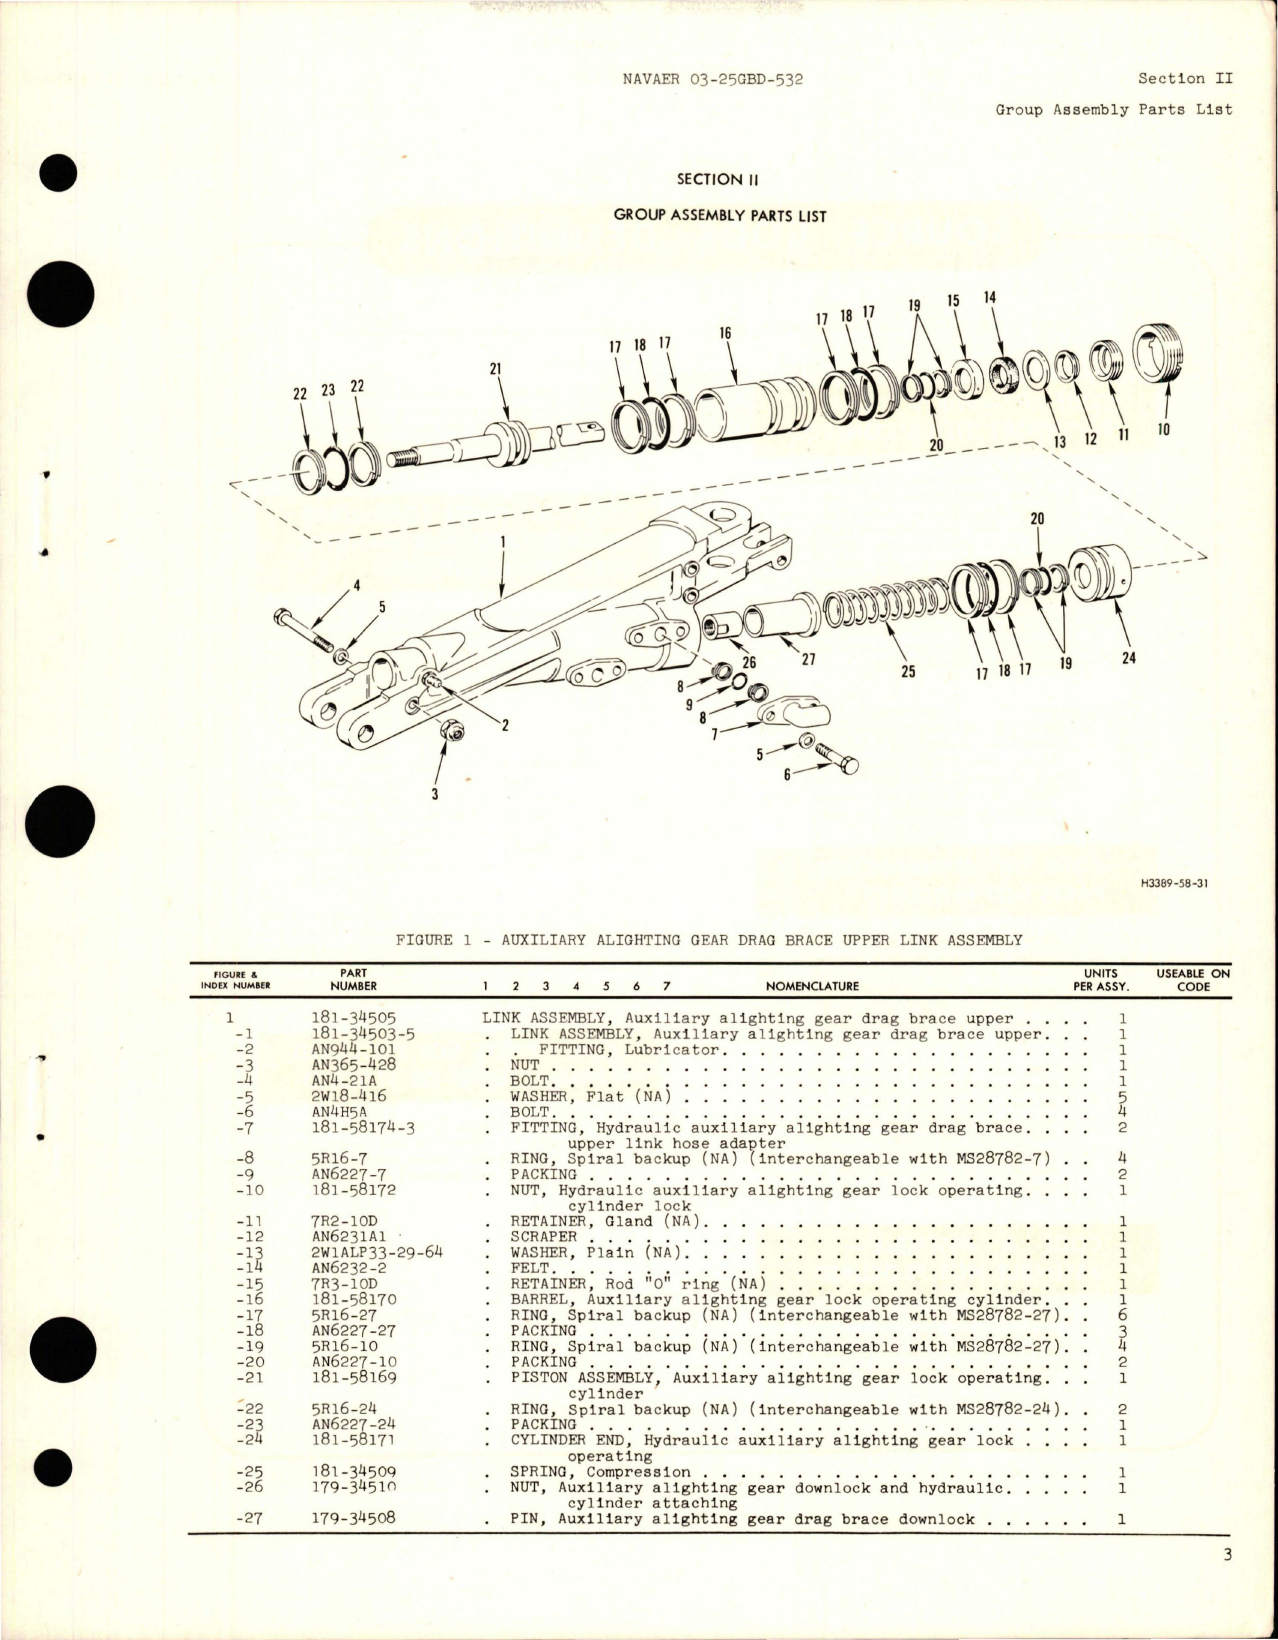 Sample page 5 from AirCorps Library document: Illustrated Parts Breakdown for Auxiliary Alighting Gear Drag Brace Upper Link Assembly - Part 181-34505 